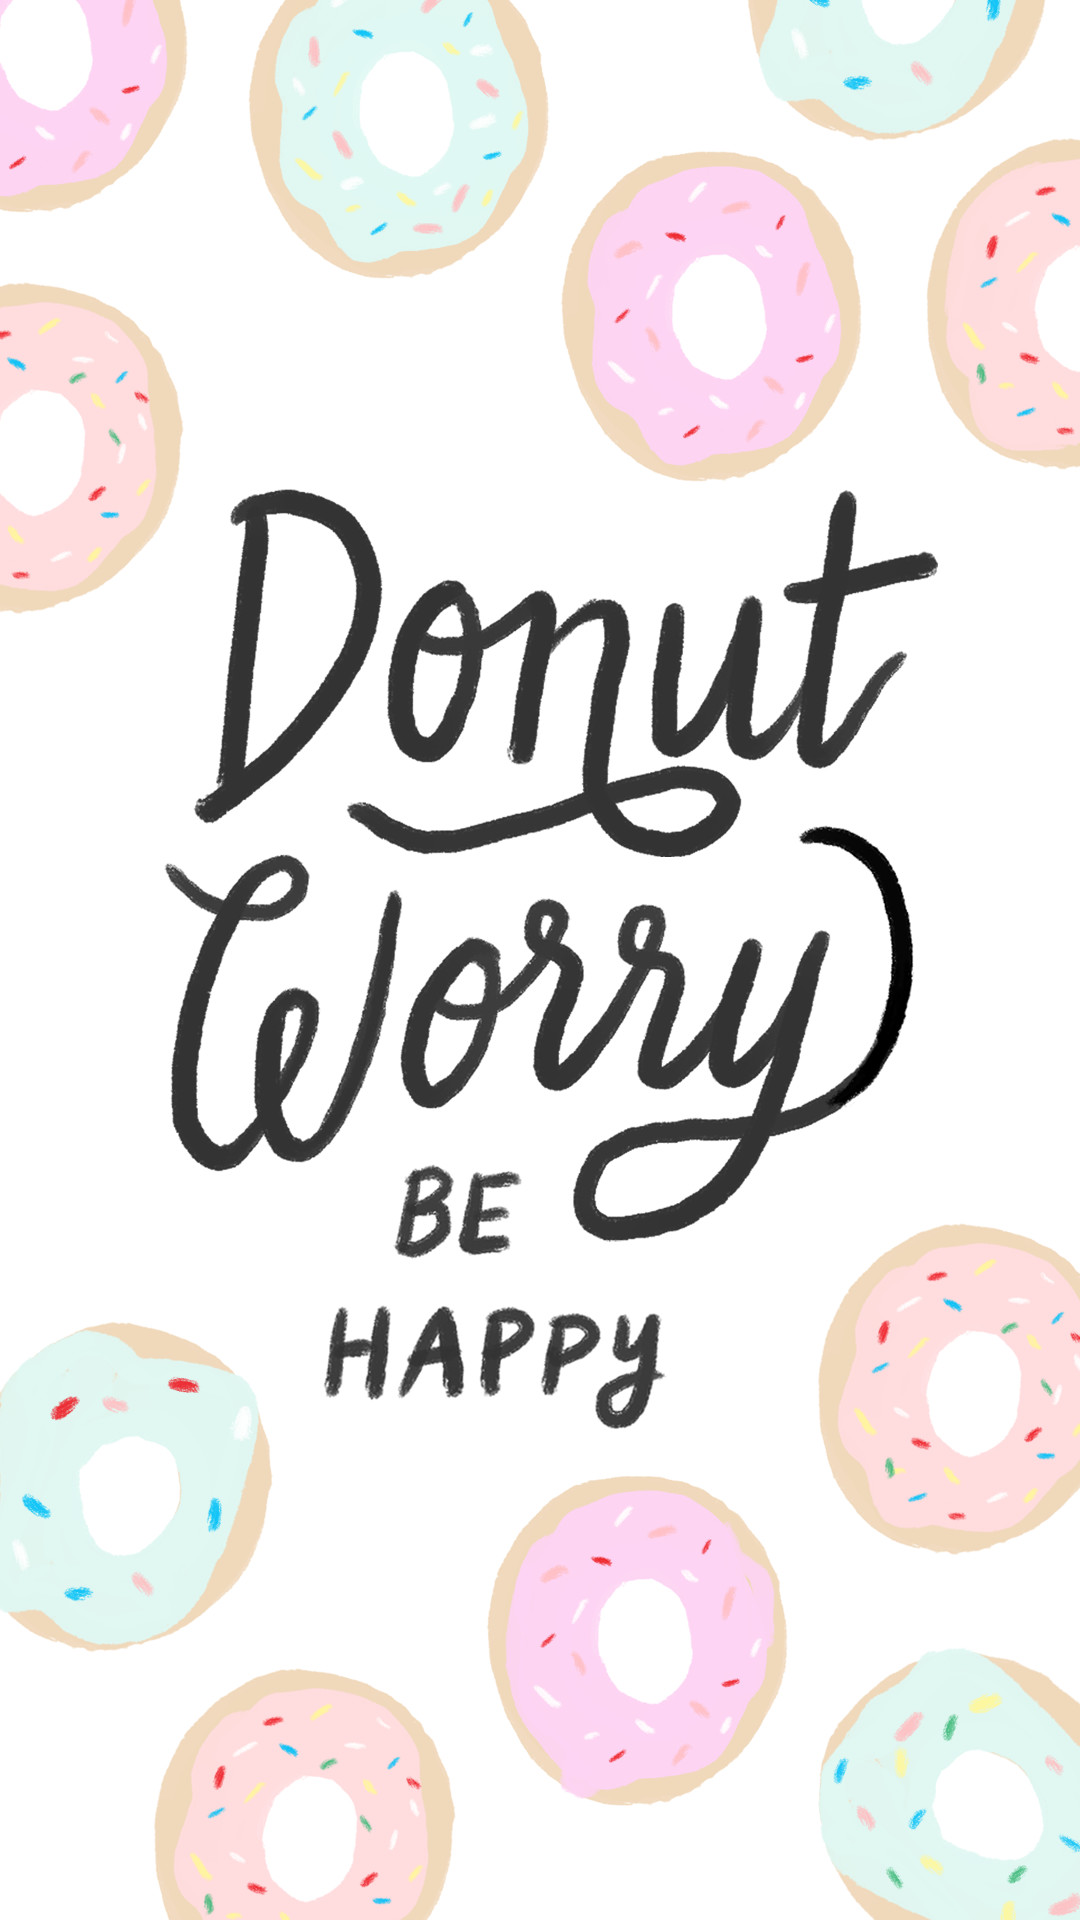 iphone-donut-worry.png (1080Ã1920) | Wallpapers | Pinterest | Wallpaper,  Donuts and Phone